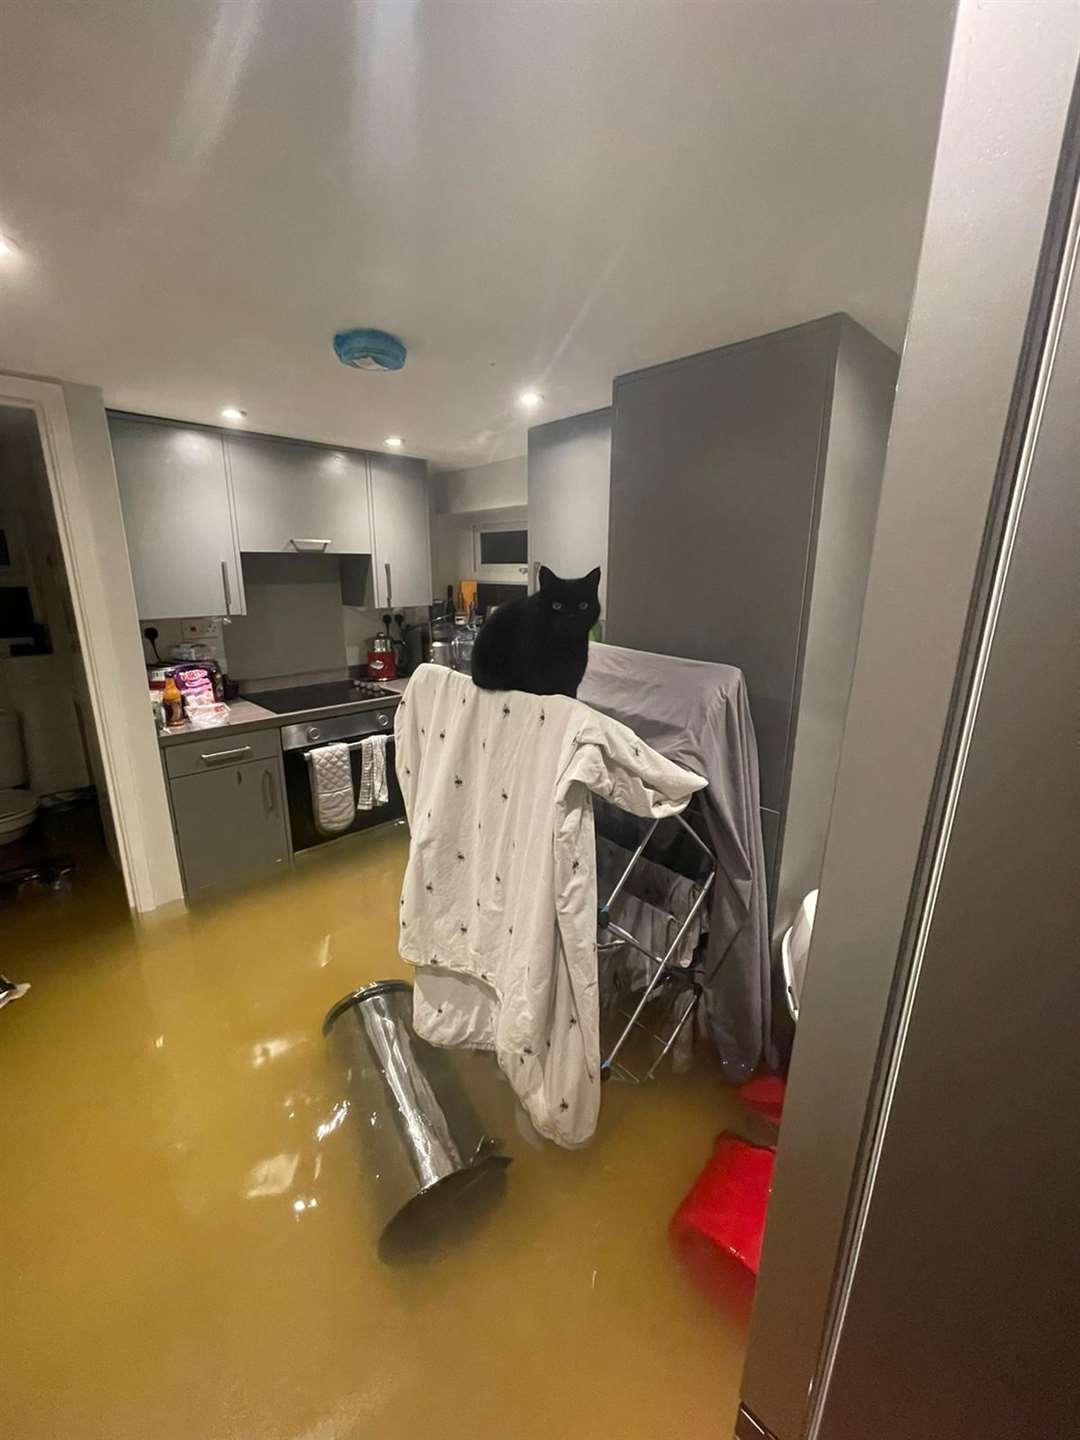 Tony King and Frances Spanner's flat in Herne Bay was submerged this morning. Picture: Tony King